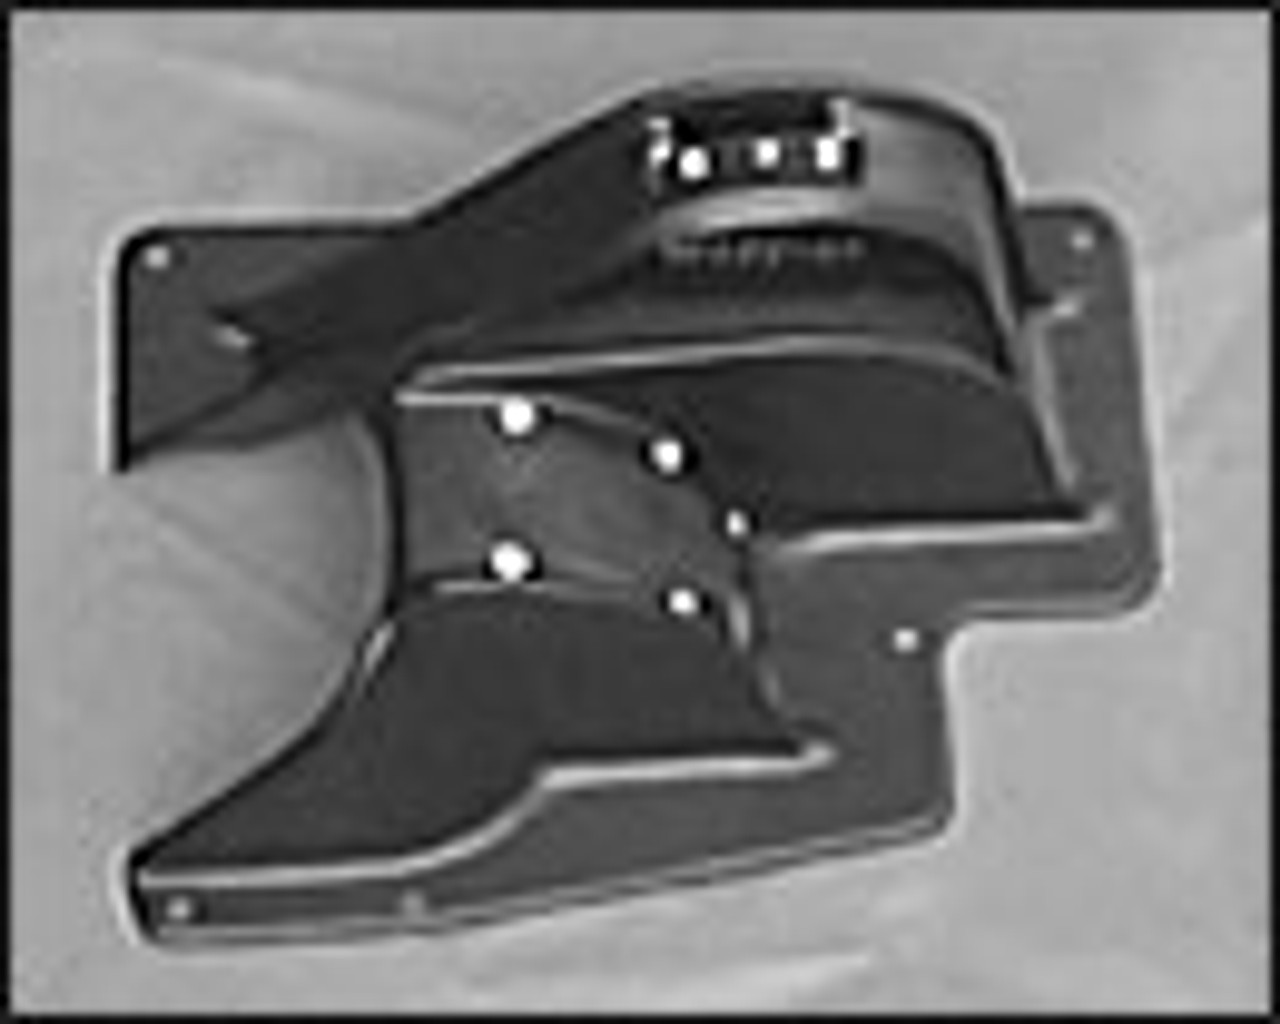 H96555-07, Piper PA-34-200, 200T, 220T, Flap Handle Cover, 96555-02, 96555-03, 96555-04, 96555-05, 96555-06, 96555-07